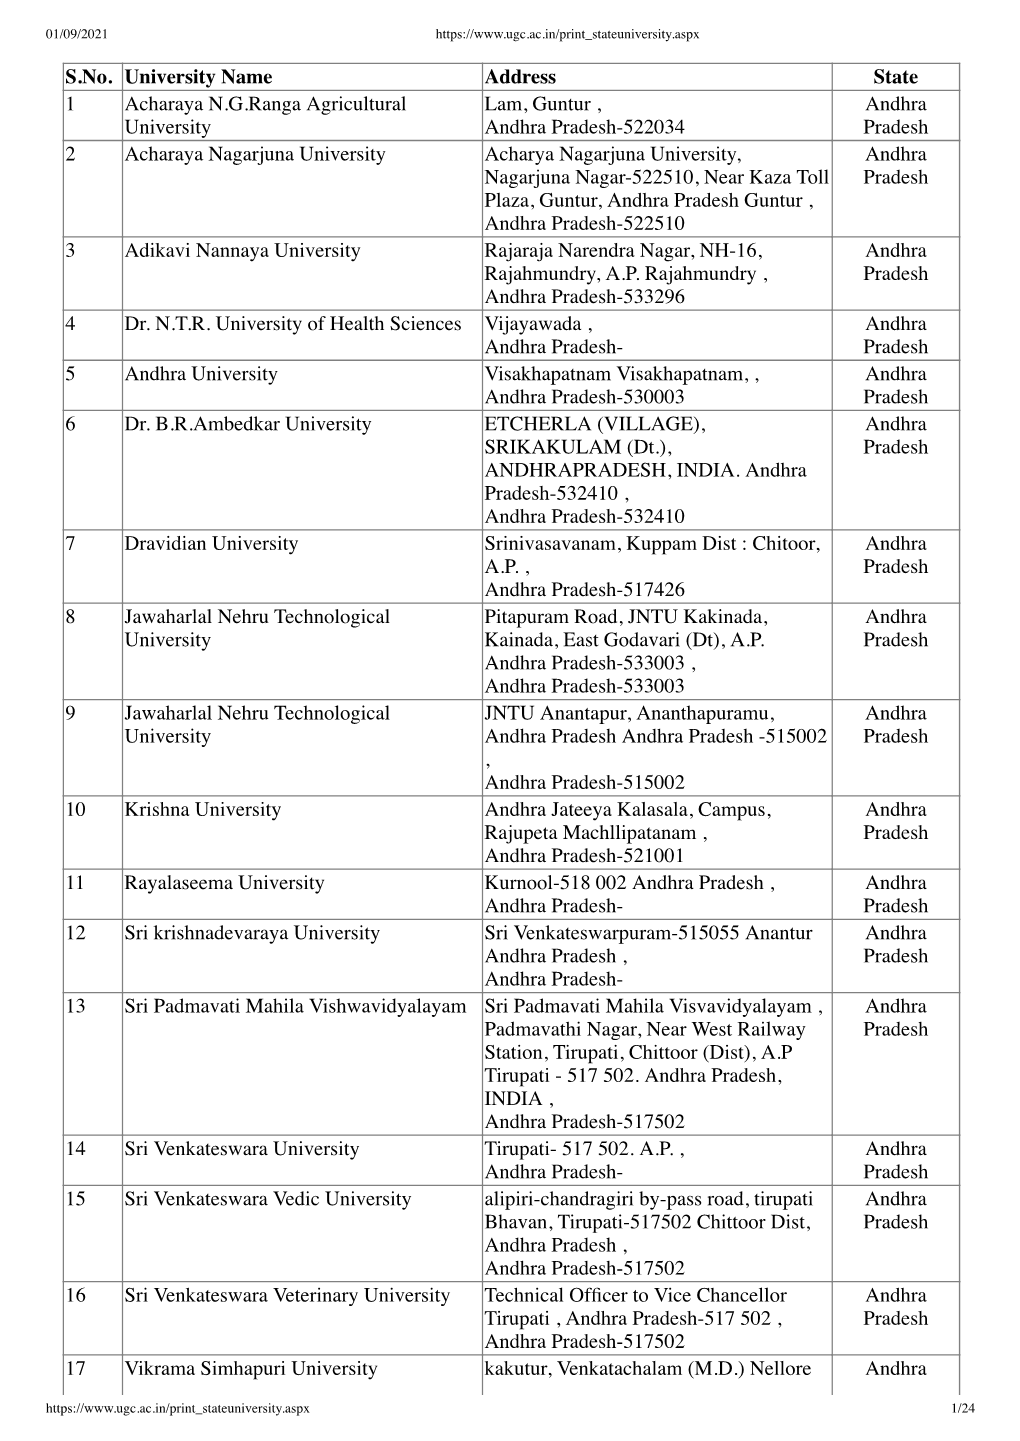 State Universities As on 31.03.2021